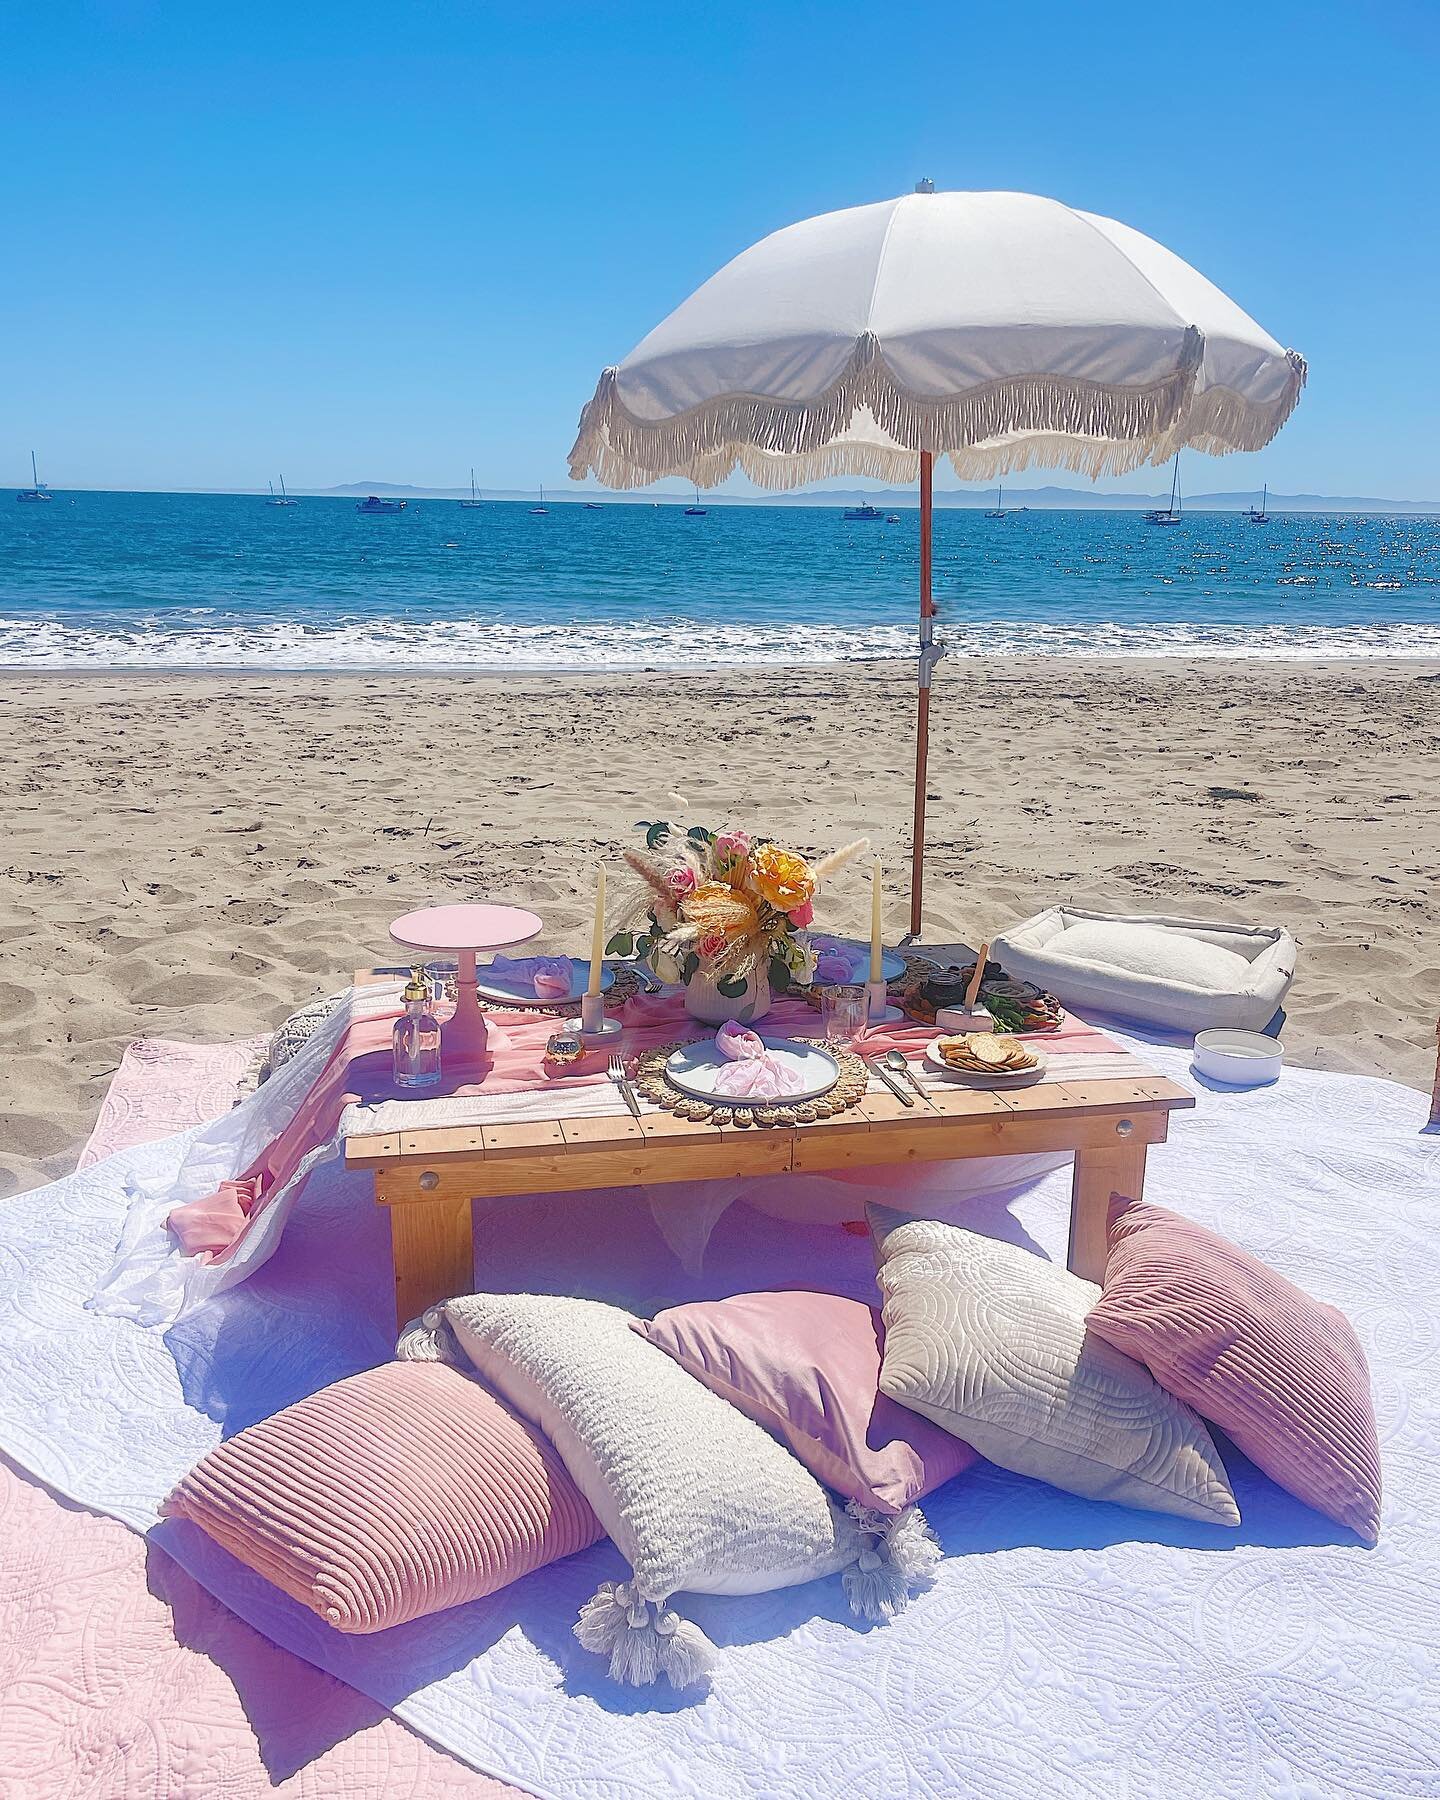 An afternoon under the sun for one, two, three and don&rsquo;t forget four 🐶🌸✨
.
.
.
#picoftheday #picnic #picnicaesthetic #pink #pup #dog #dogsofinstagram #furbaby #happy #beach #sun #santabarbara